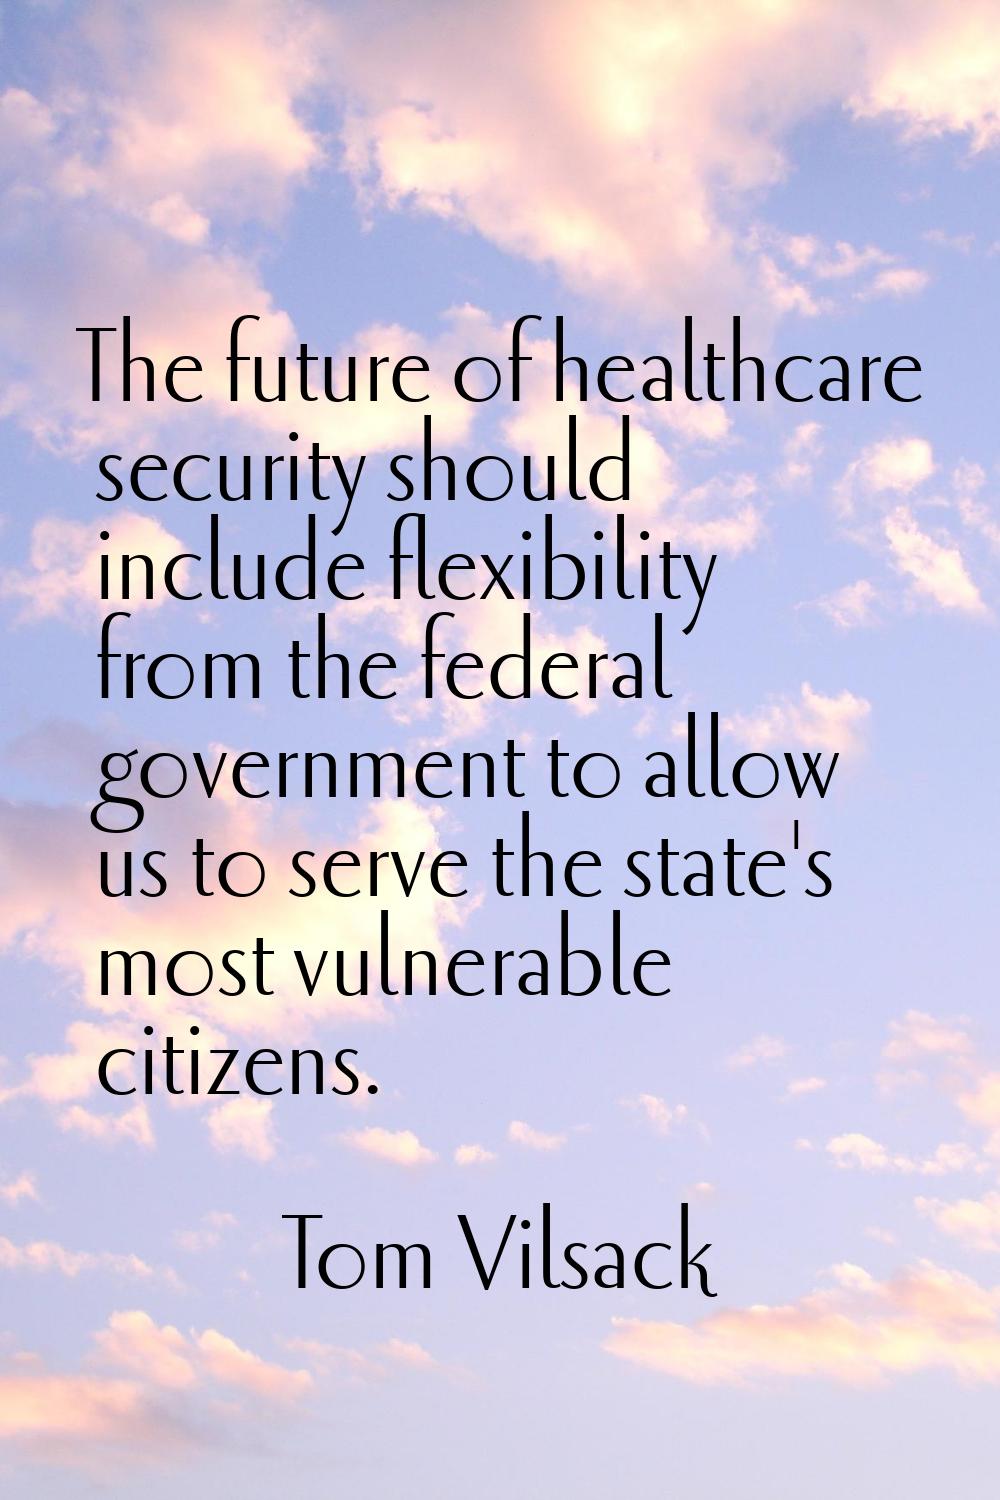 The future of healthcare security should include flexibility from the federal government to allow u